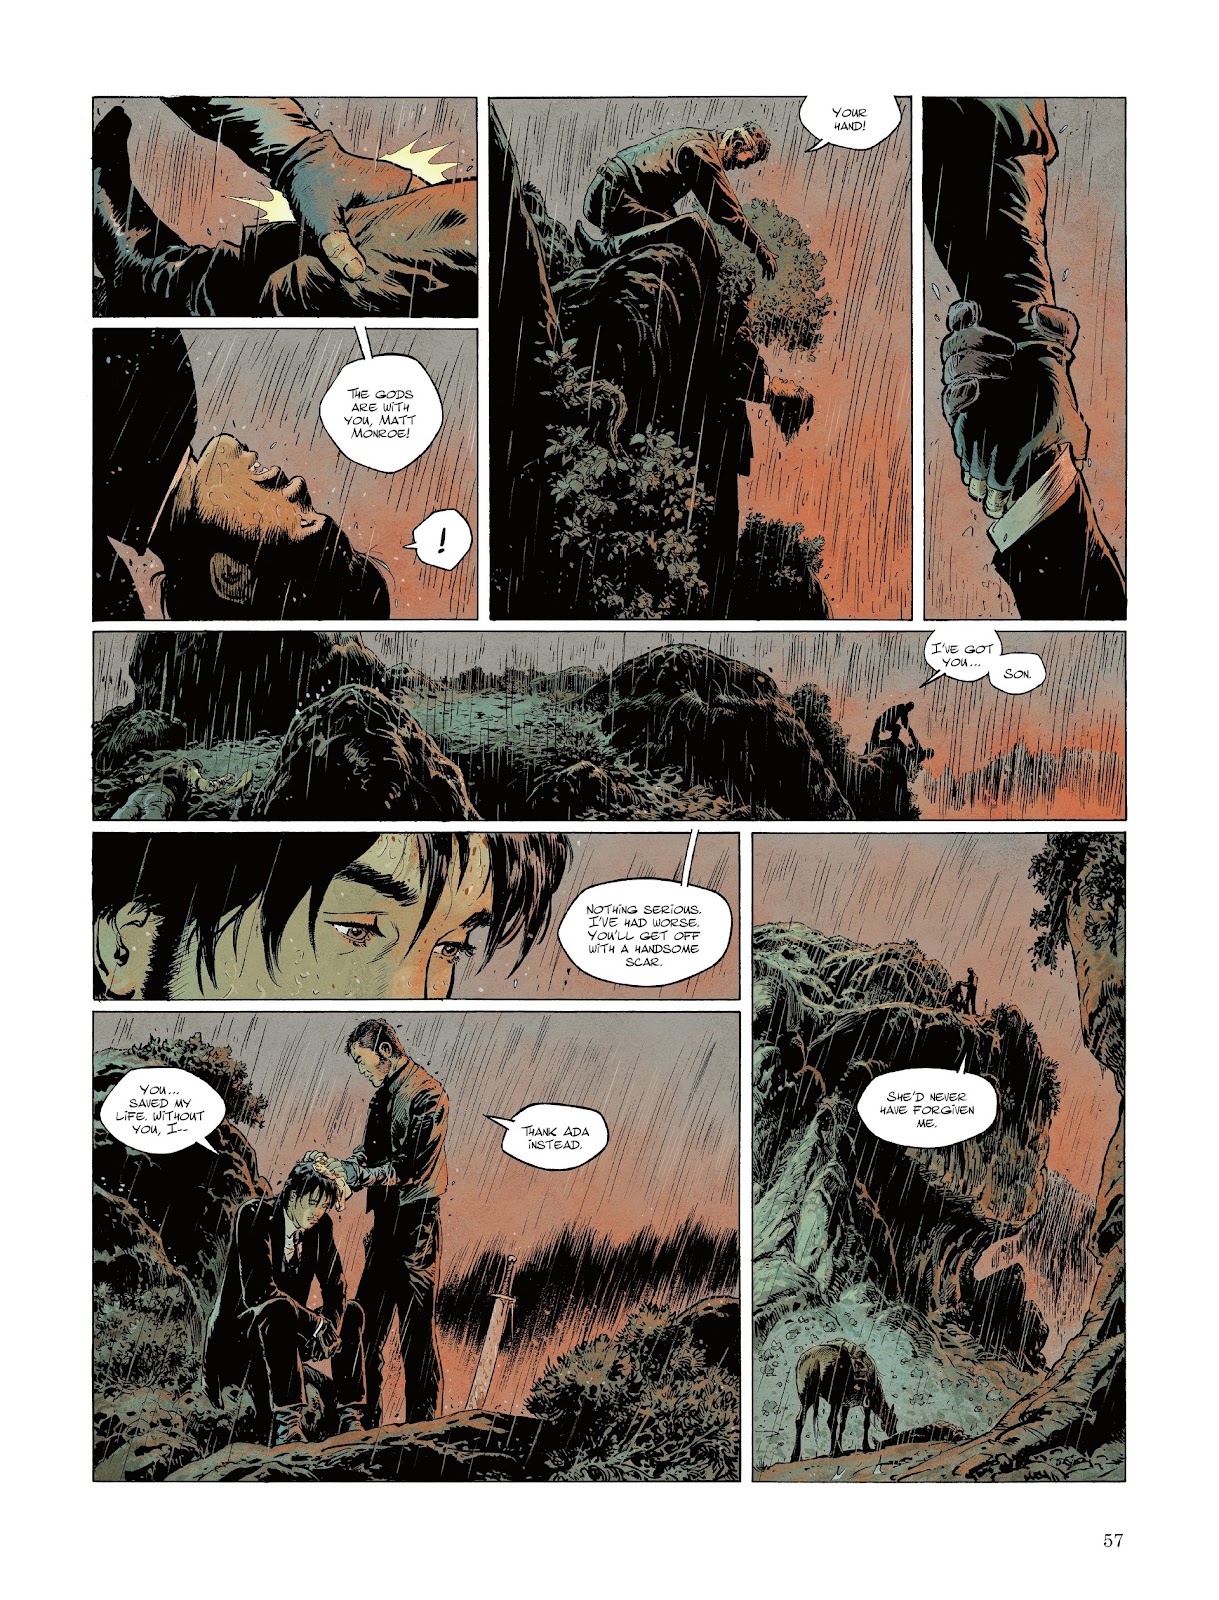 The Tiger Awakens: The Return of John Chinaman issue 1 - Page 58